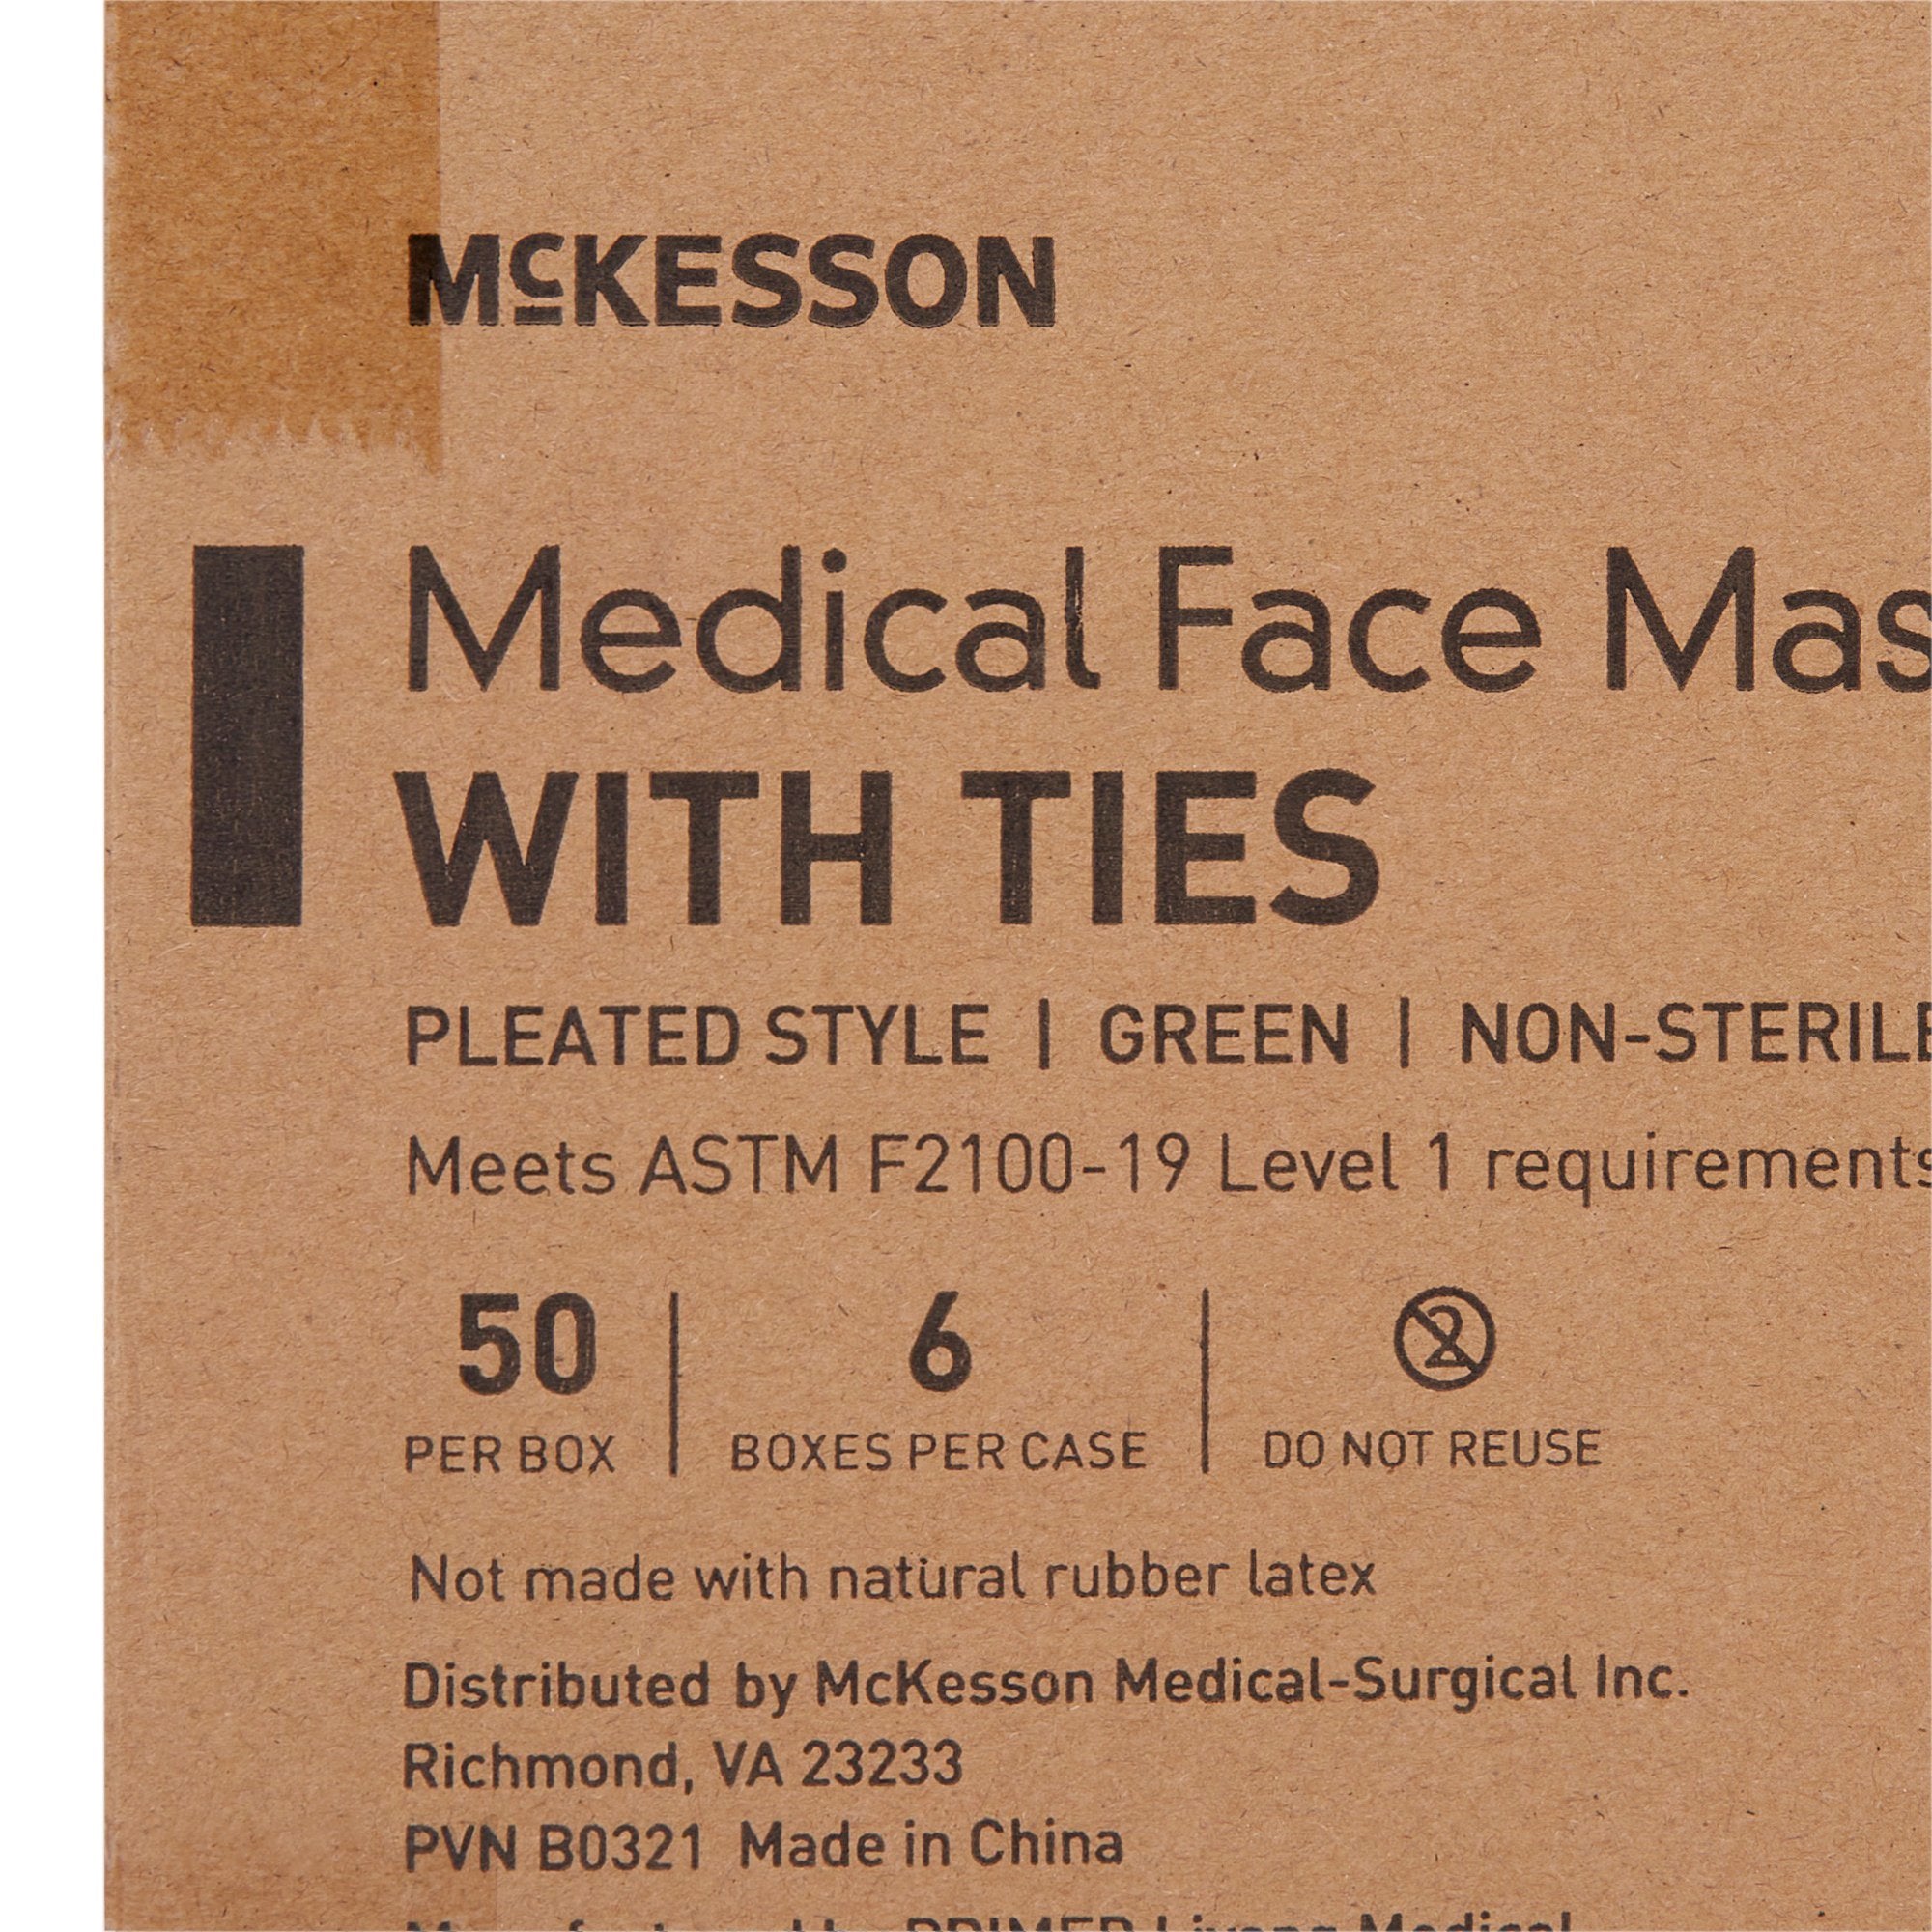 Surgical Mask McKesson Anti-fog Pleated Tie Closure One Size Fits Most Green NonSterile ASTM Level 1 Adult